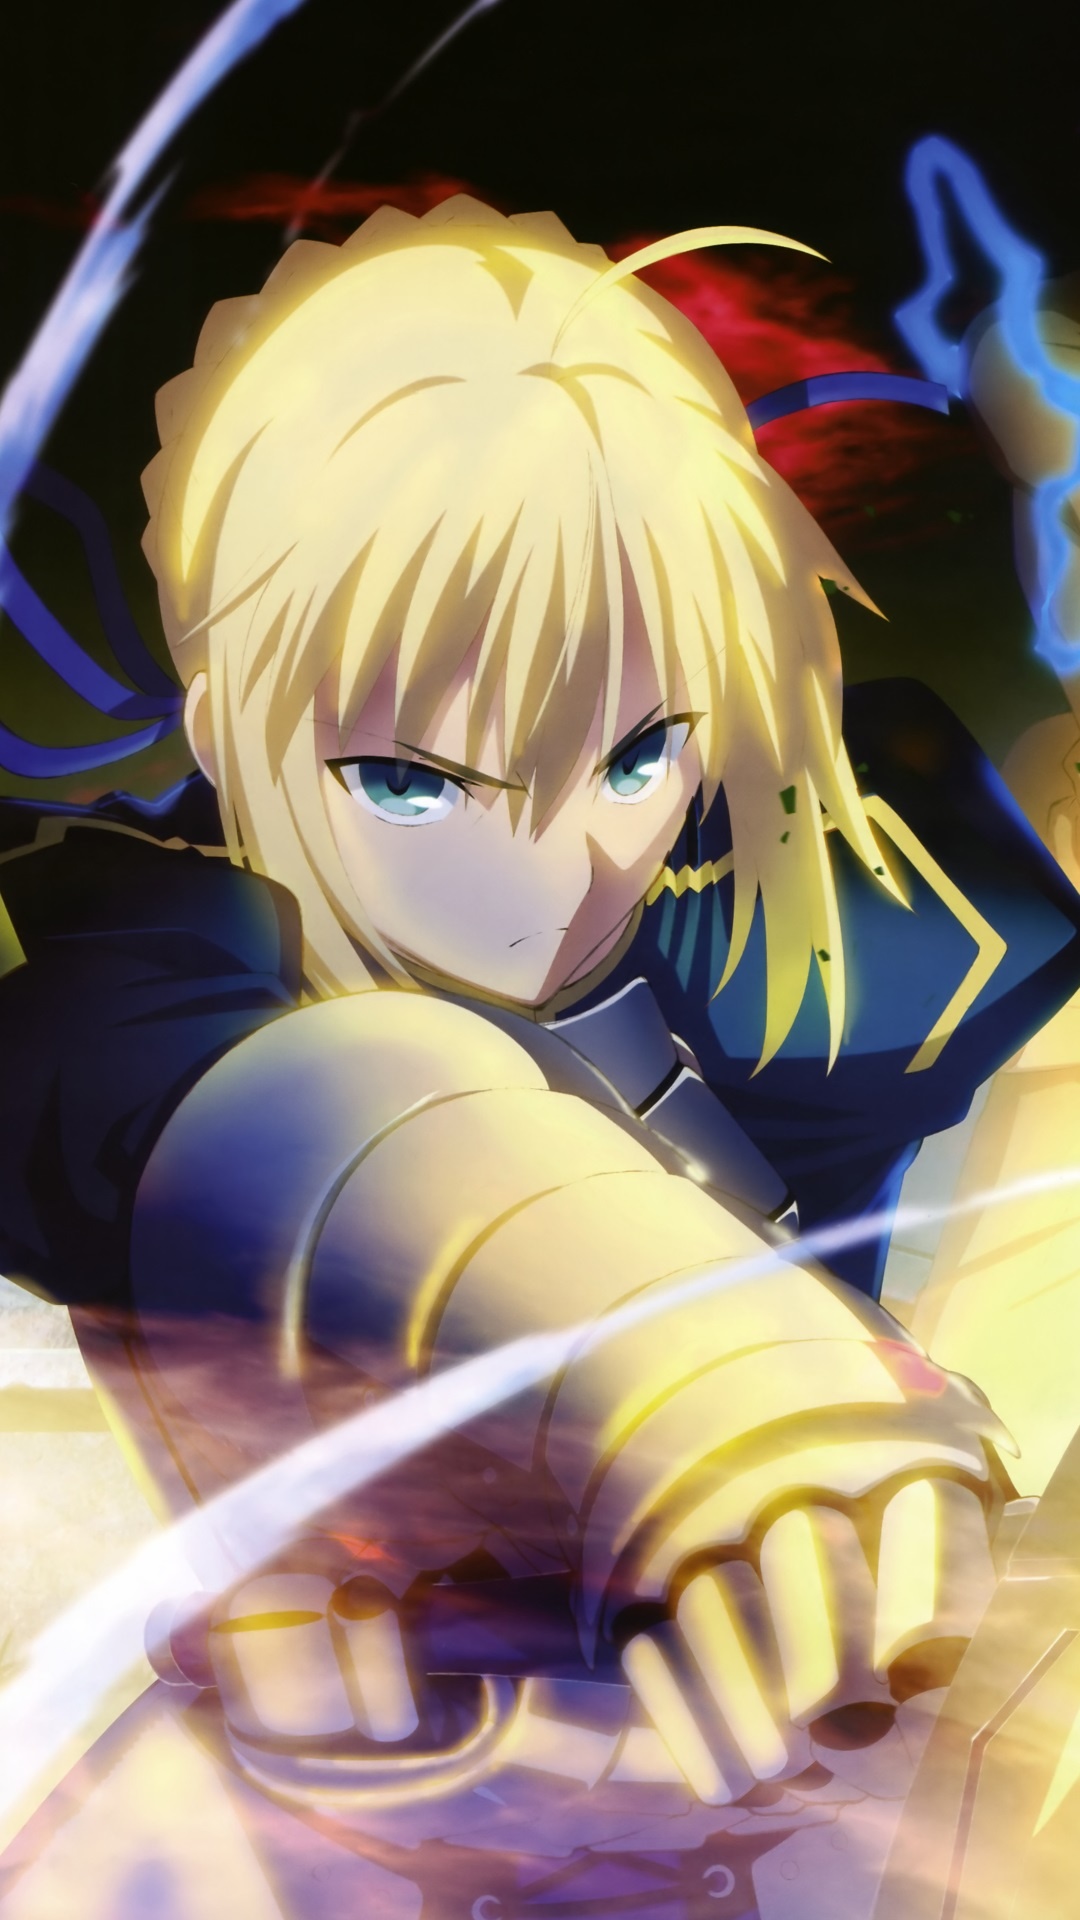 Fate/stay night: Unlimited Blade Works Wallpapers (44+ images inside)